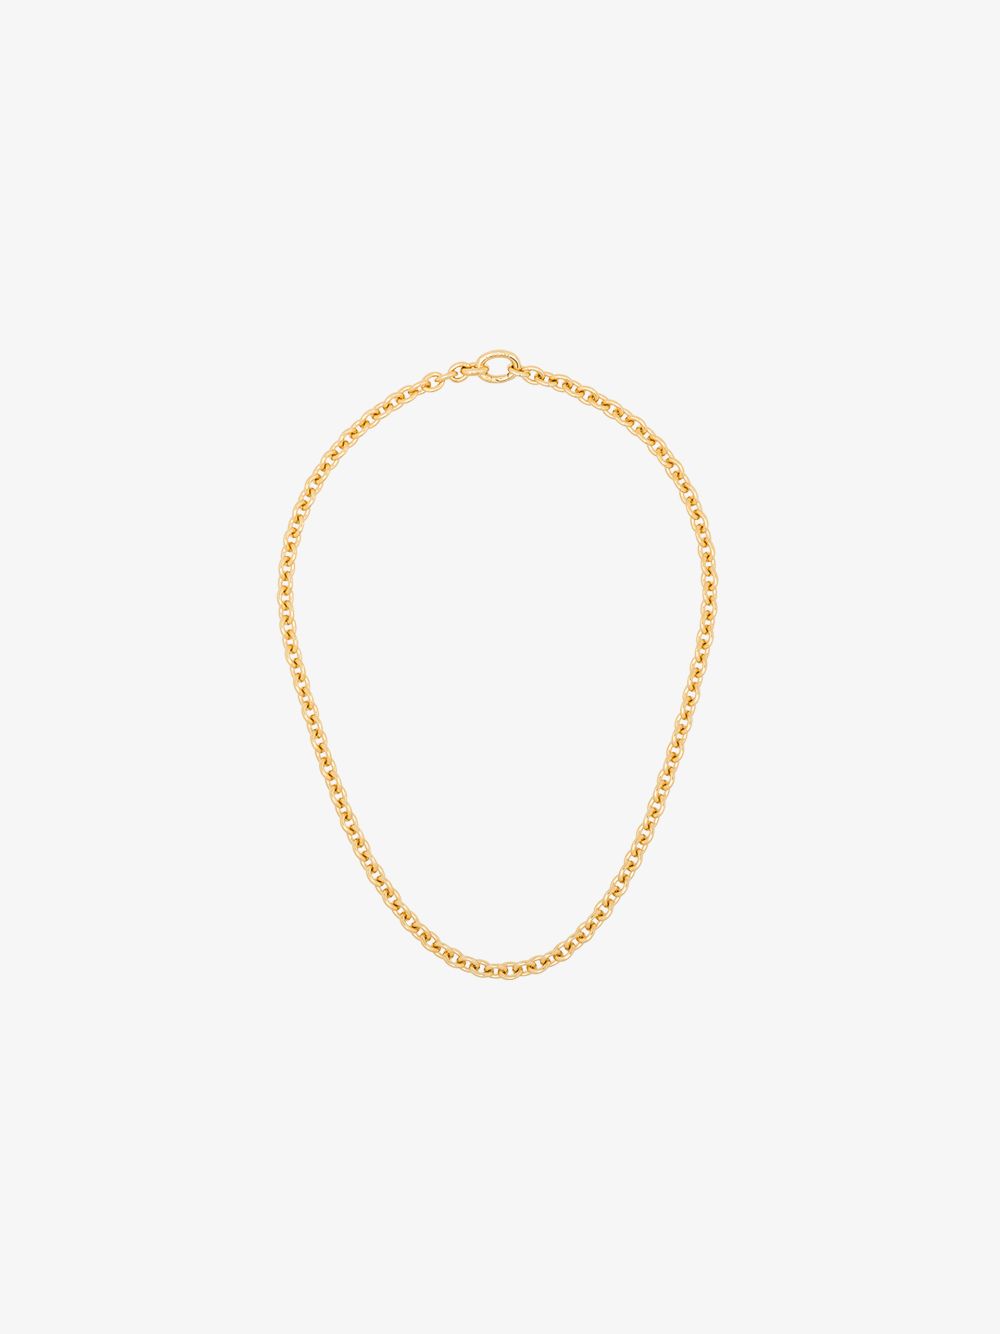 TOM WOOD GOLD-PLATED SLIM CHAIN NECKLACE,N01056RCM01S9259K14599678